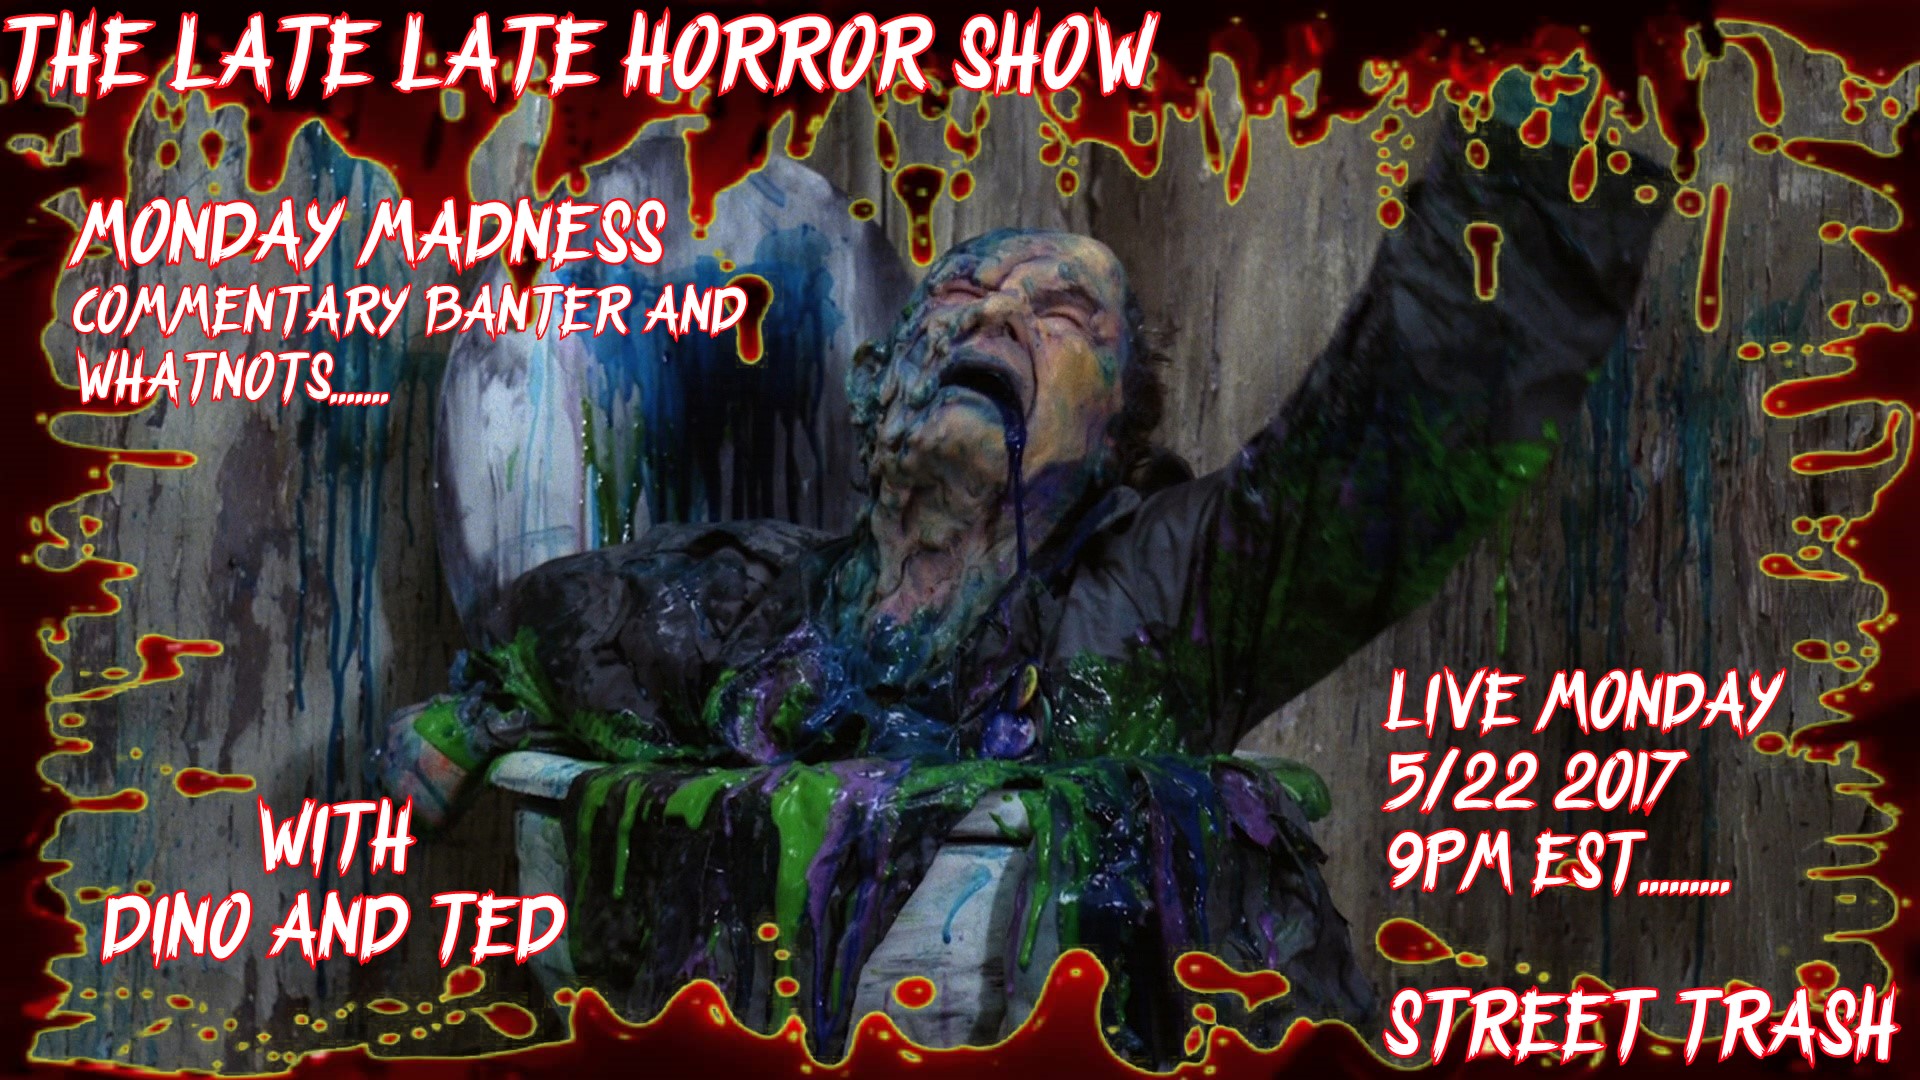 THE LATE LATE HORROR SHOW MONDAY MADNESS Street Trash 1987 Commentary